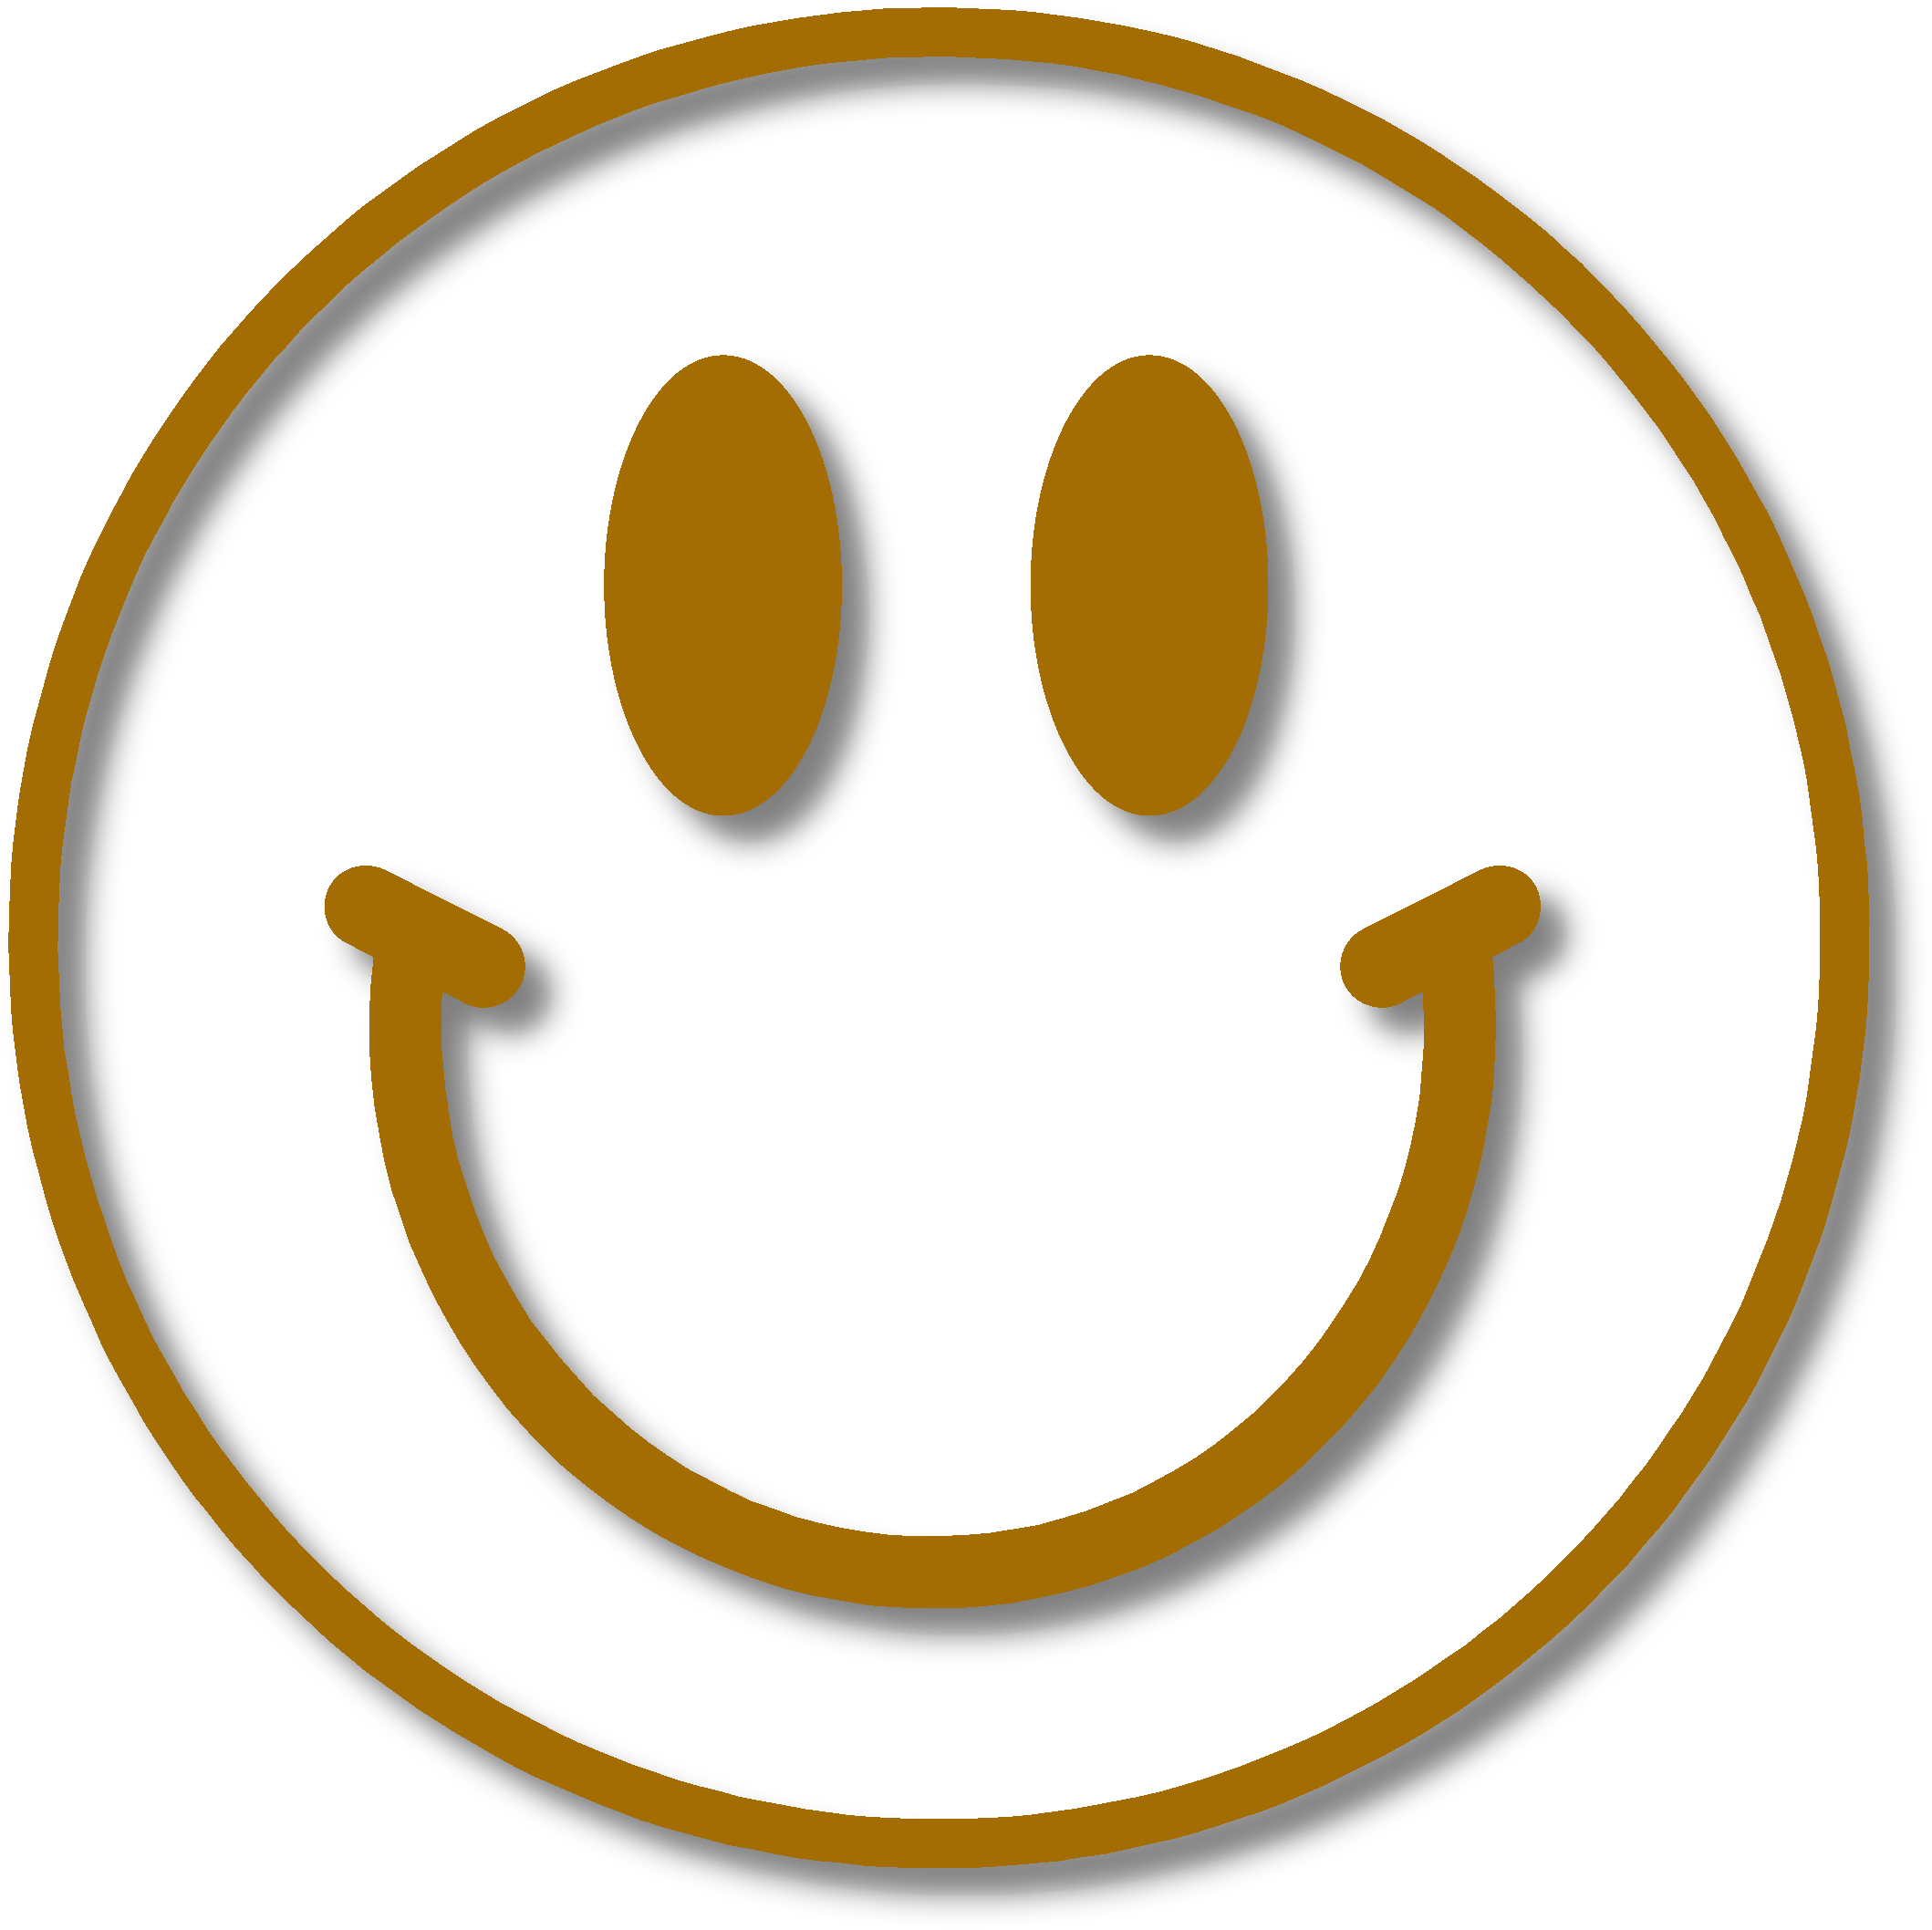 Smiley Face wallpaper by mastodon_rage - Download on ZEDGE™ | 3421